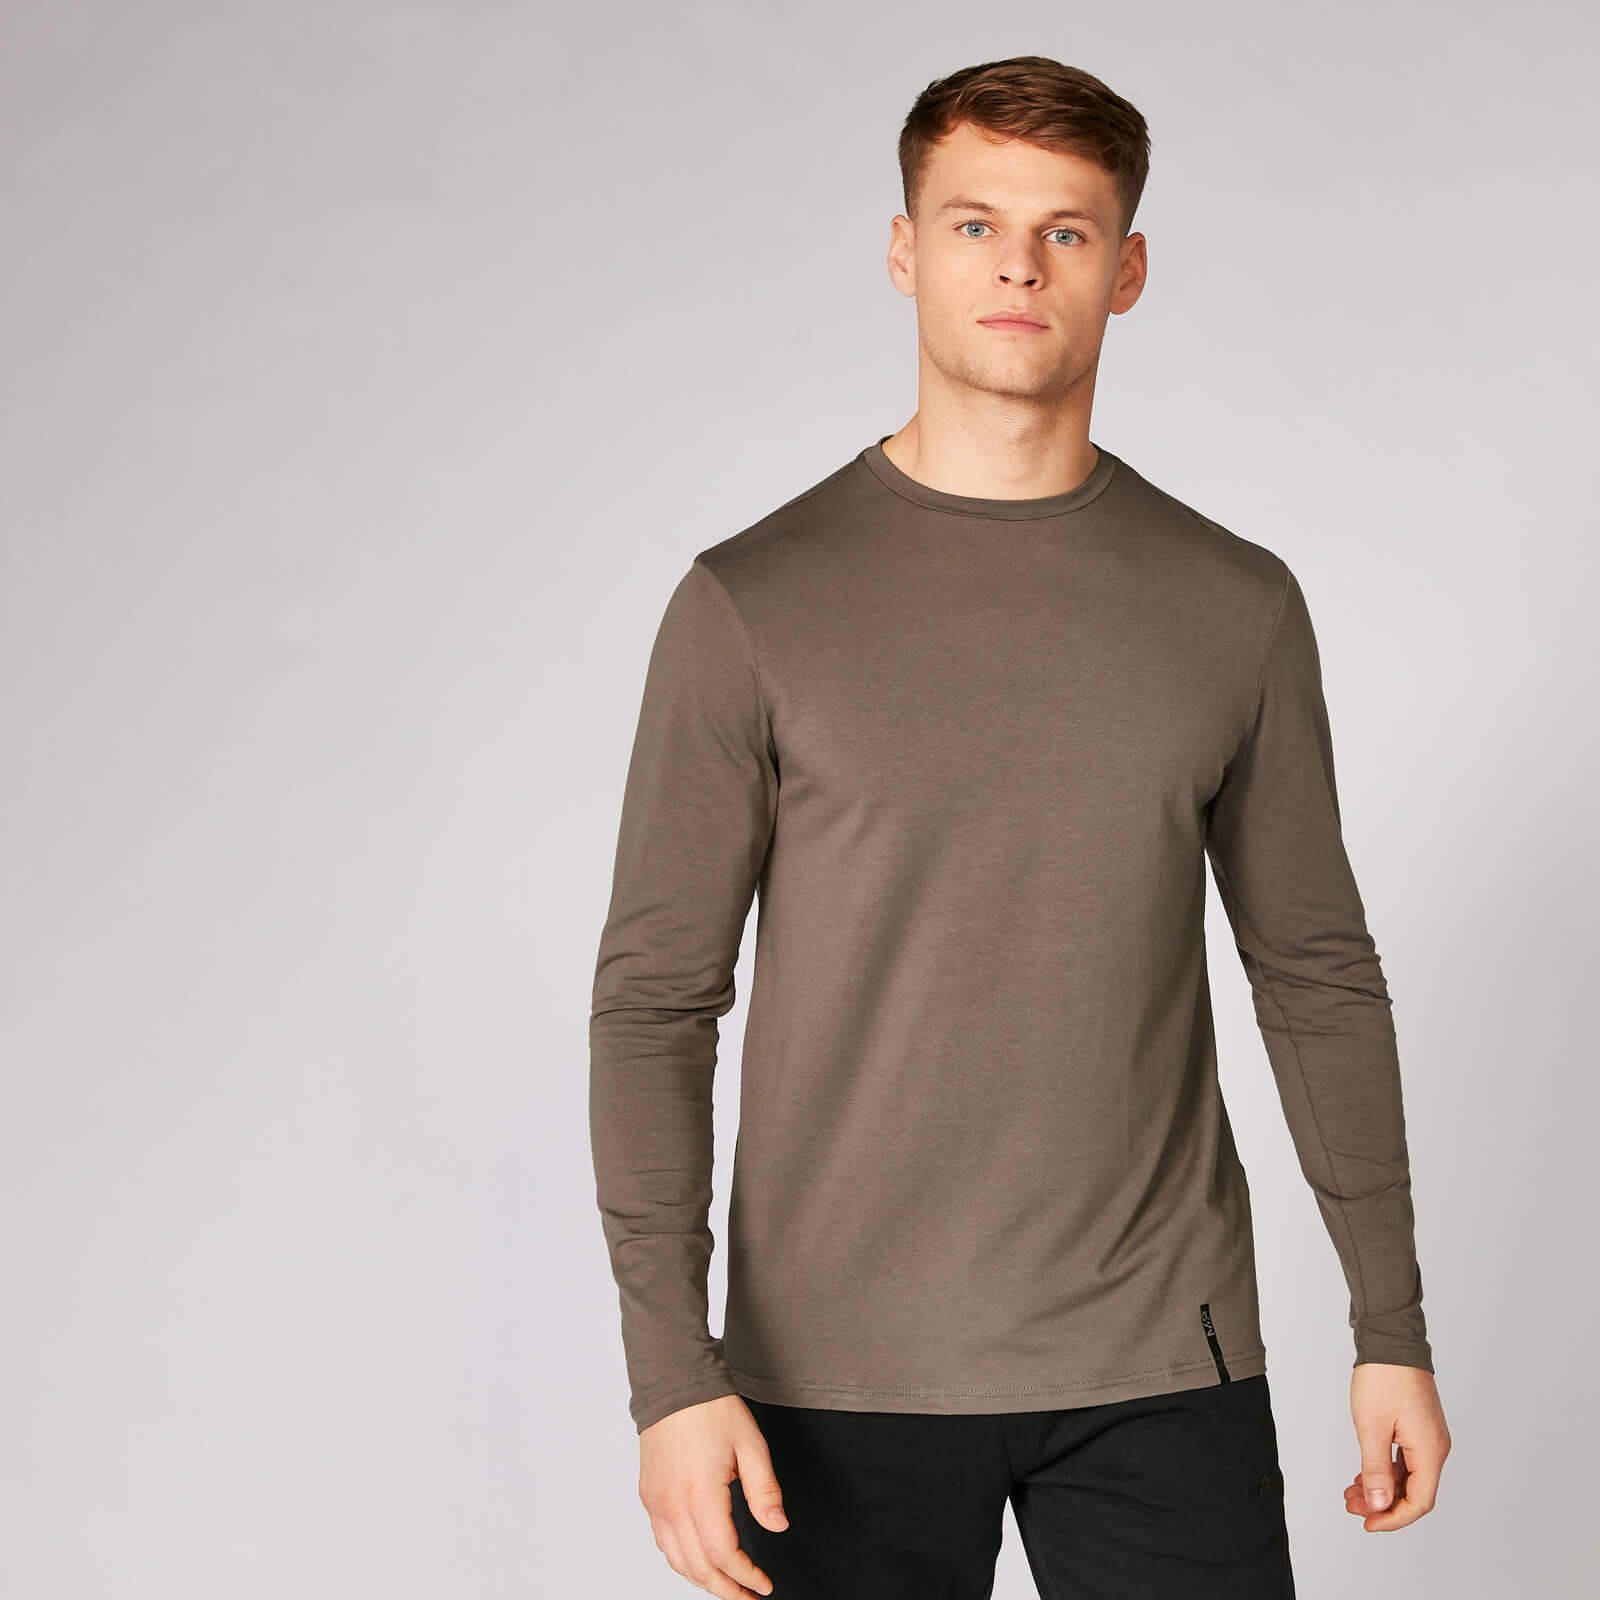 MP Men's Luxe Classic Long-Sleeve Crew - Driftwood - L